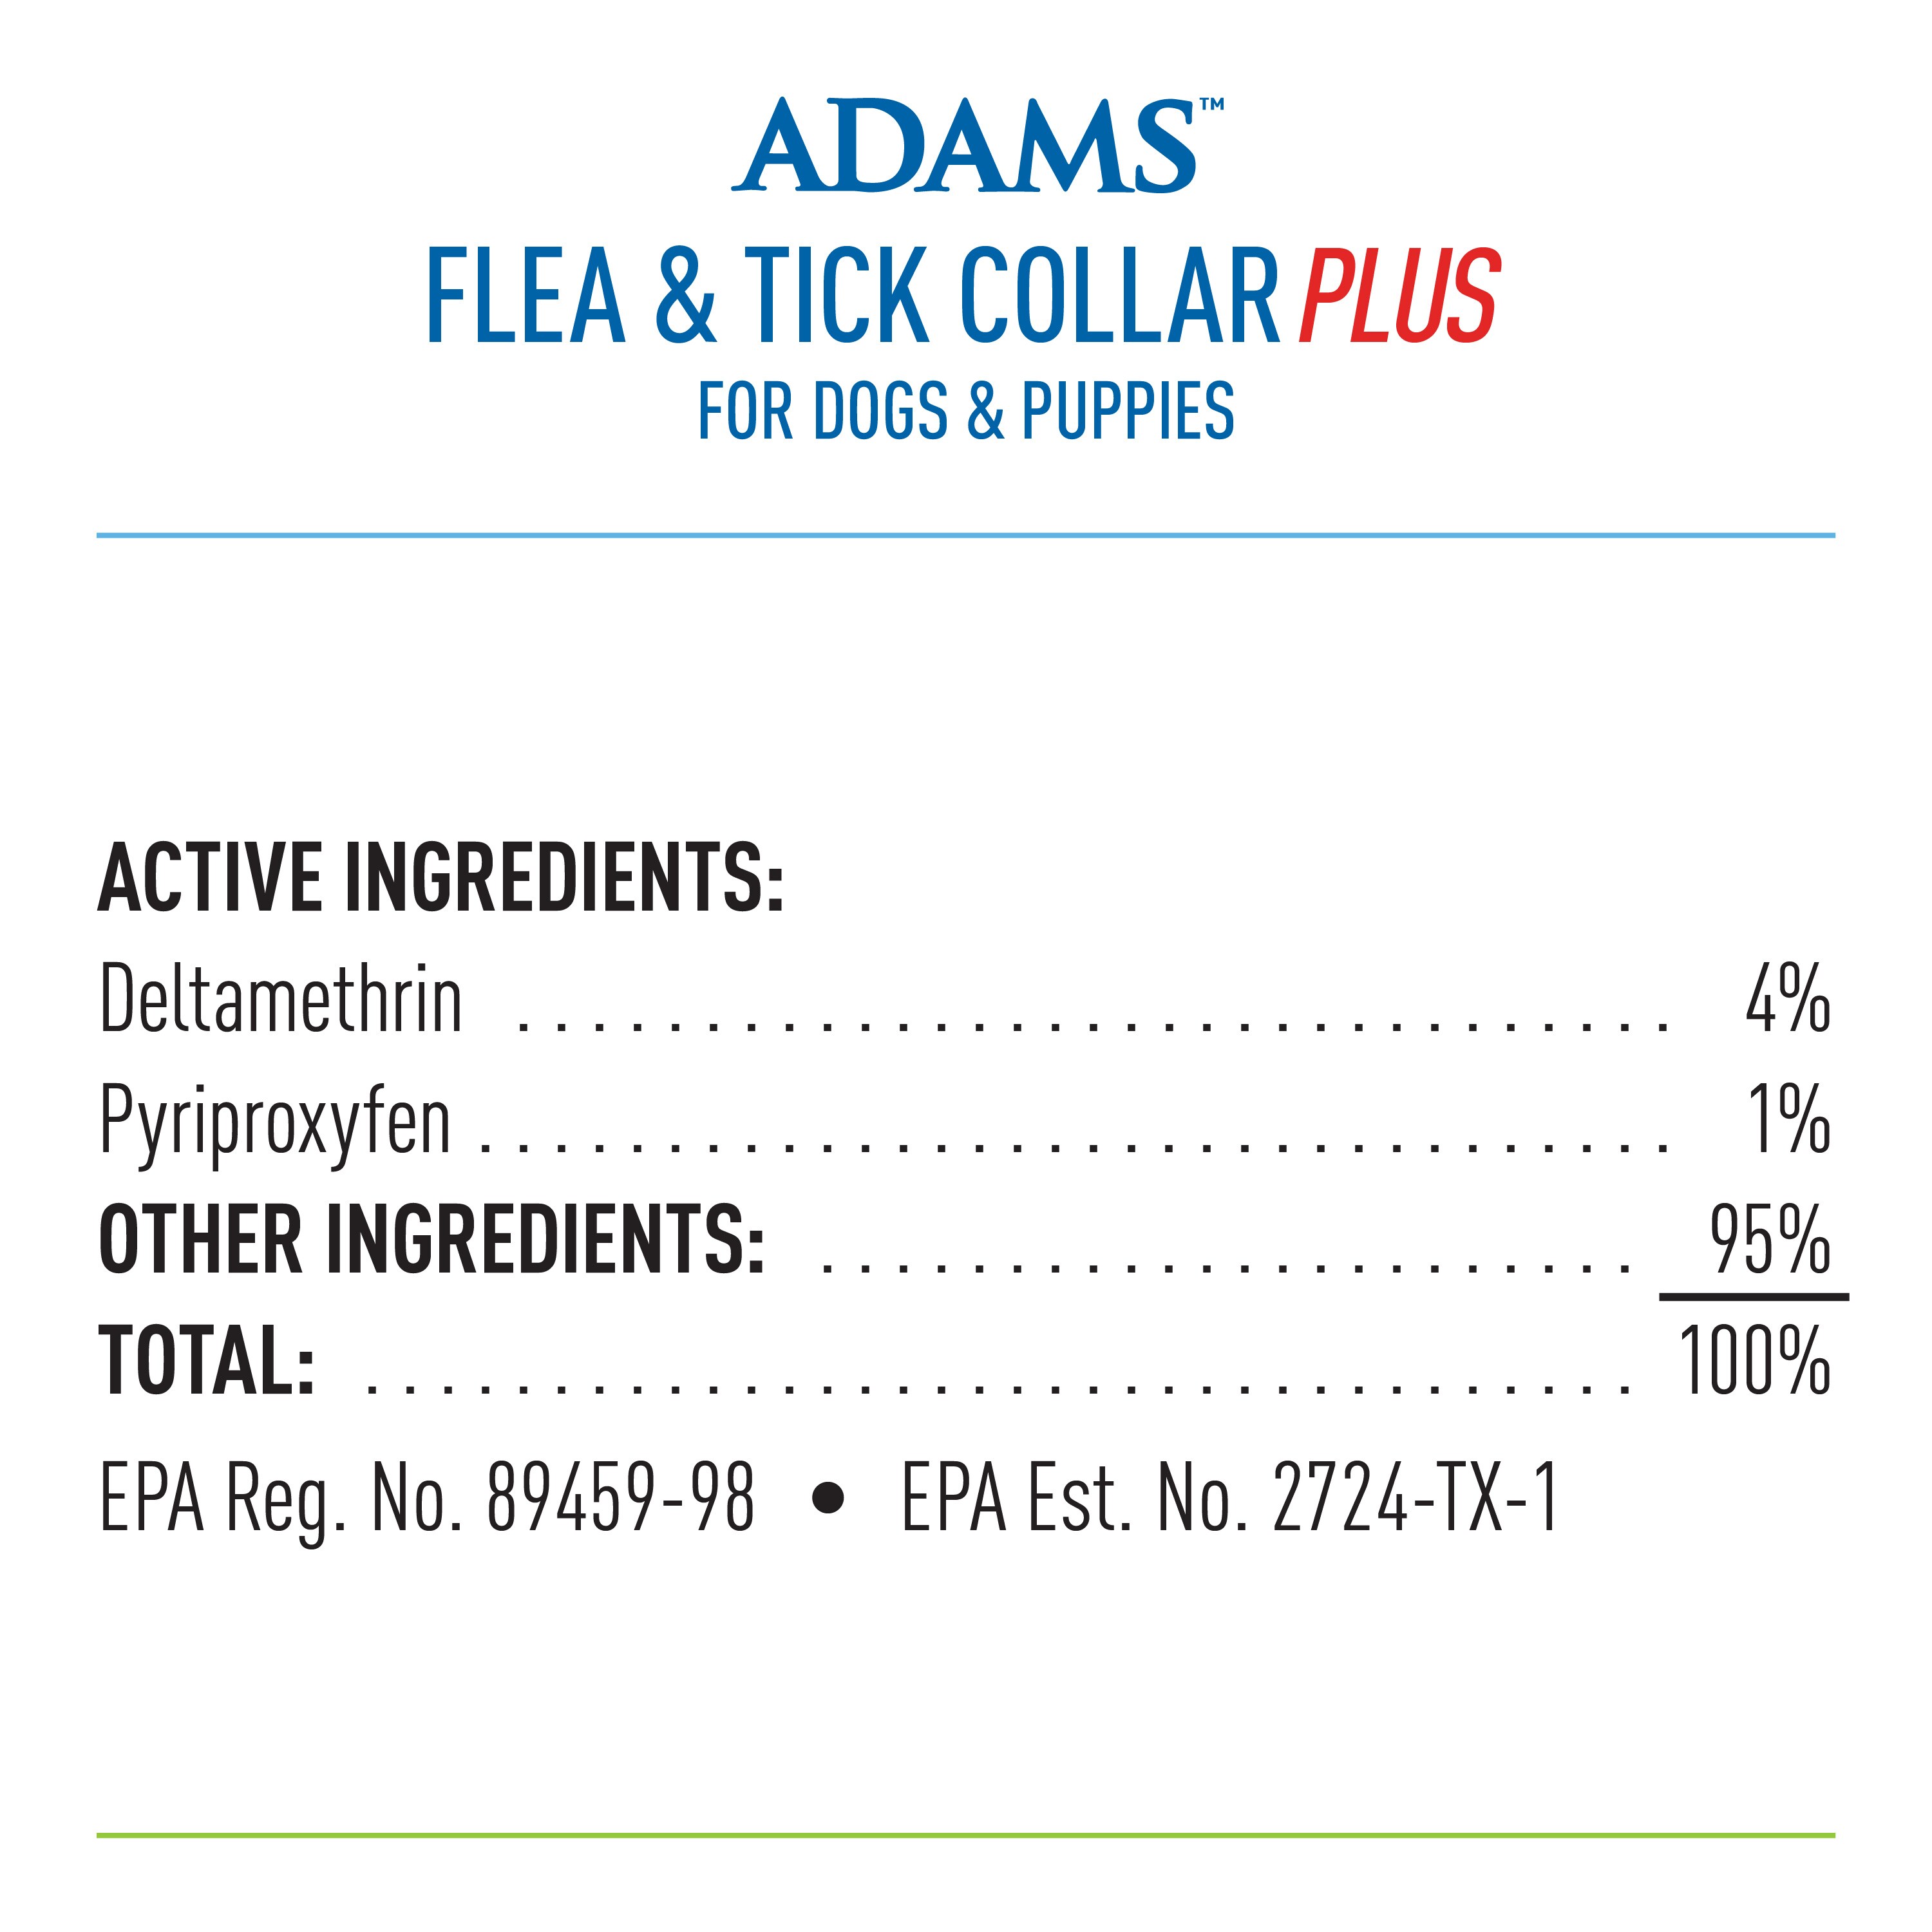 Adams Flea And Tick Plus For Dogs And Puppies Collar Flea And Tick